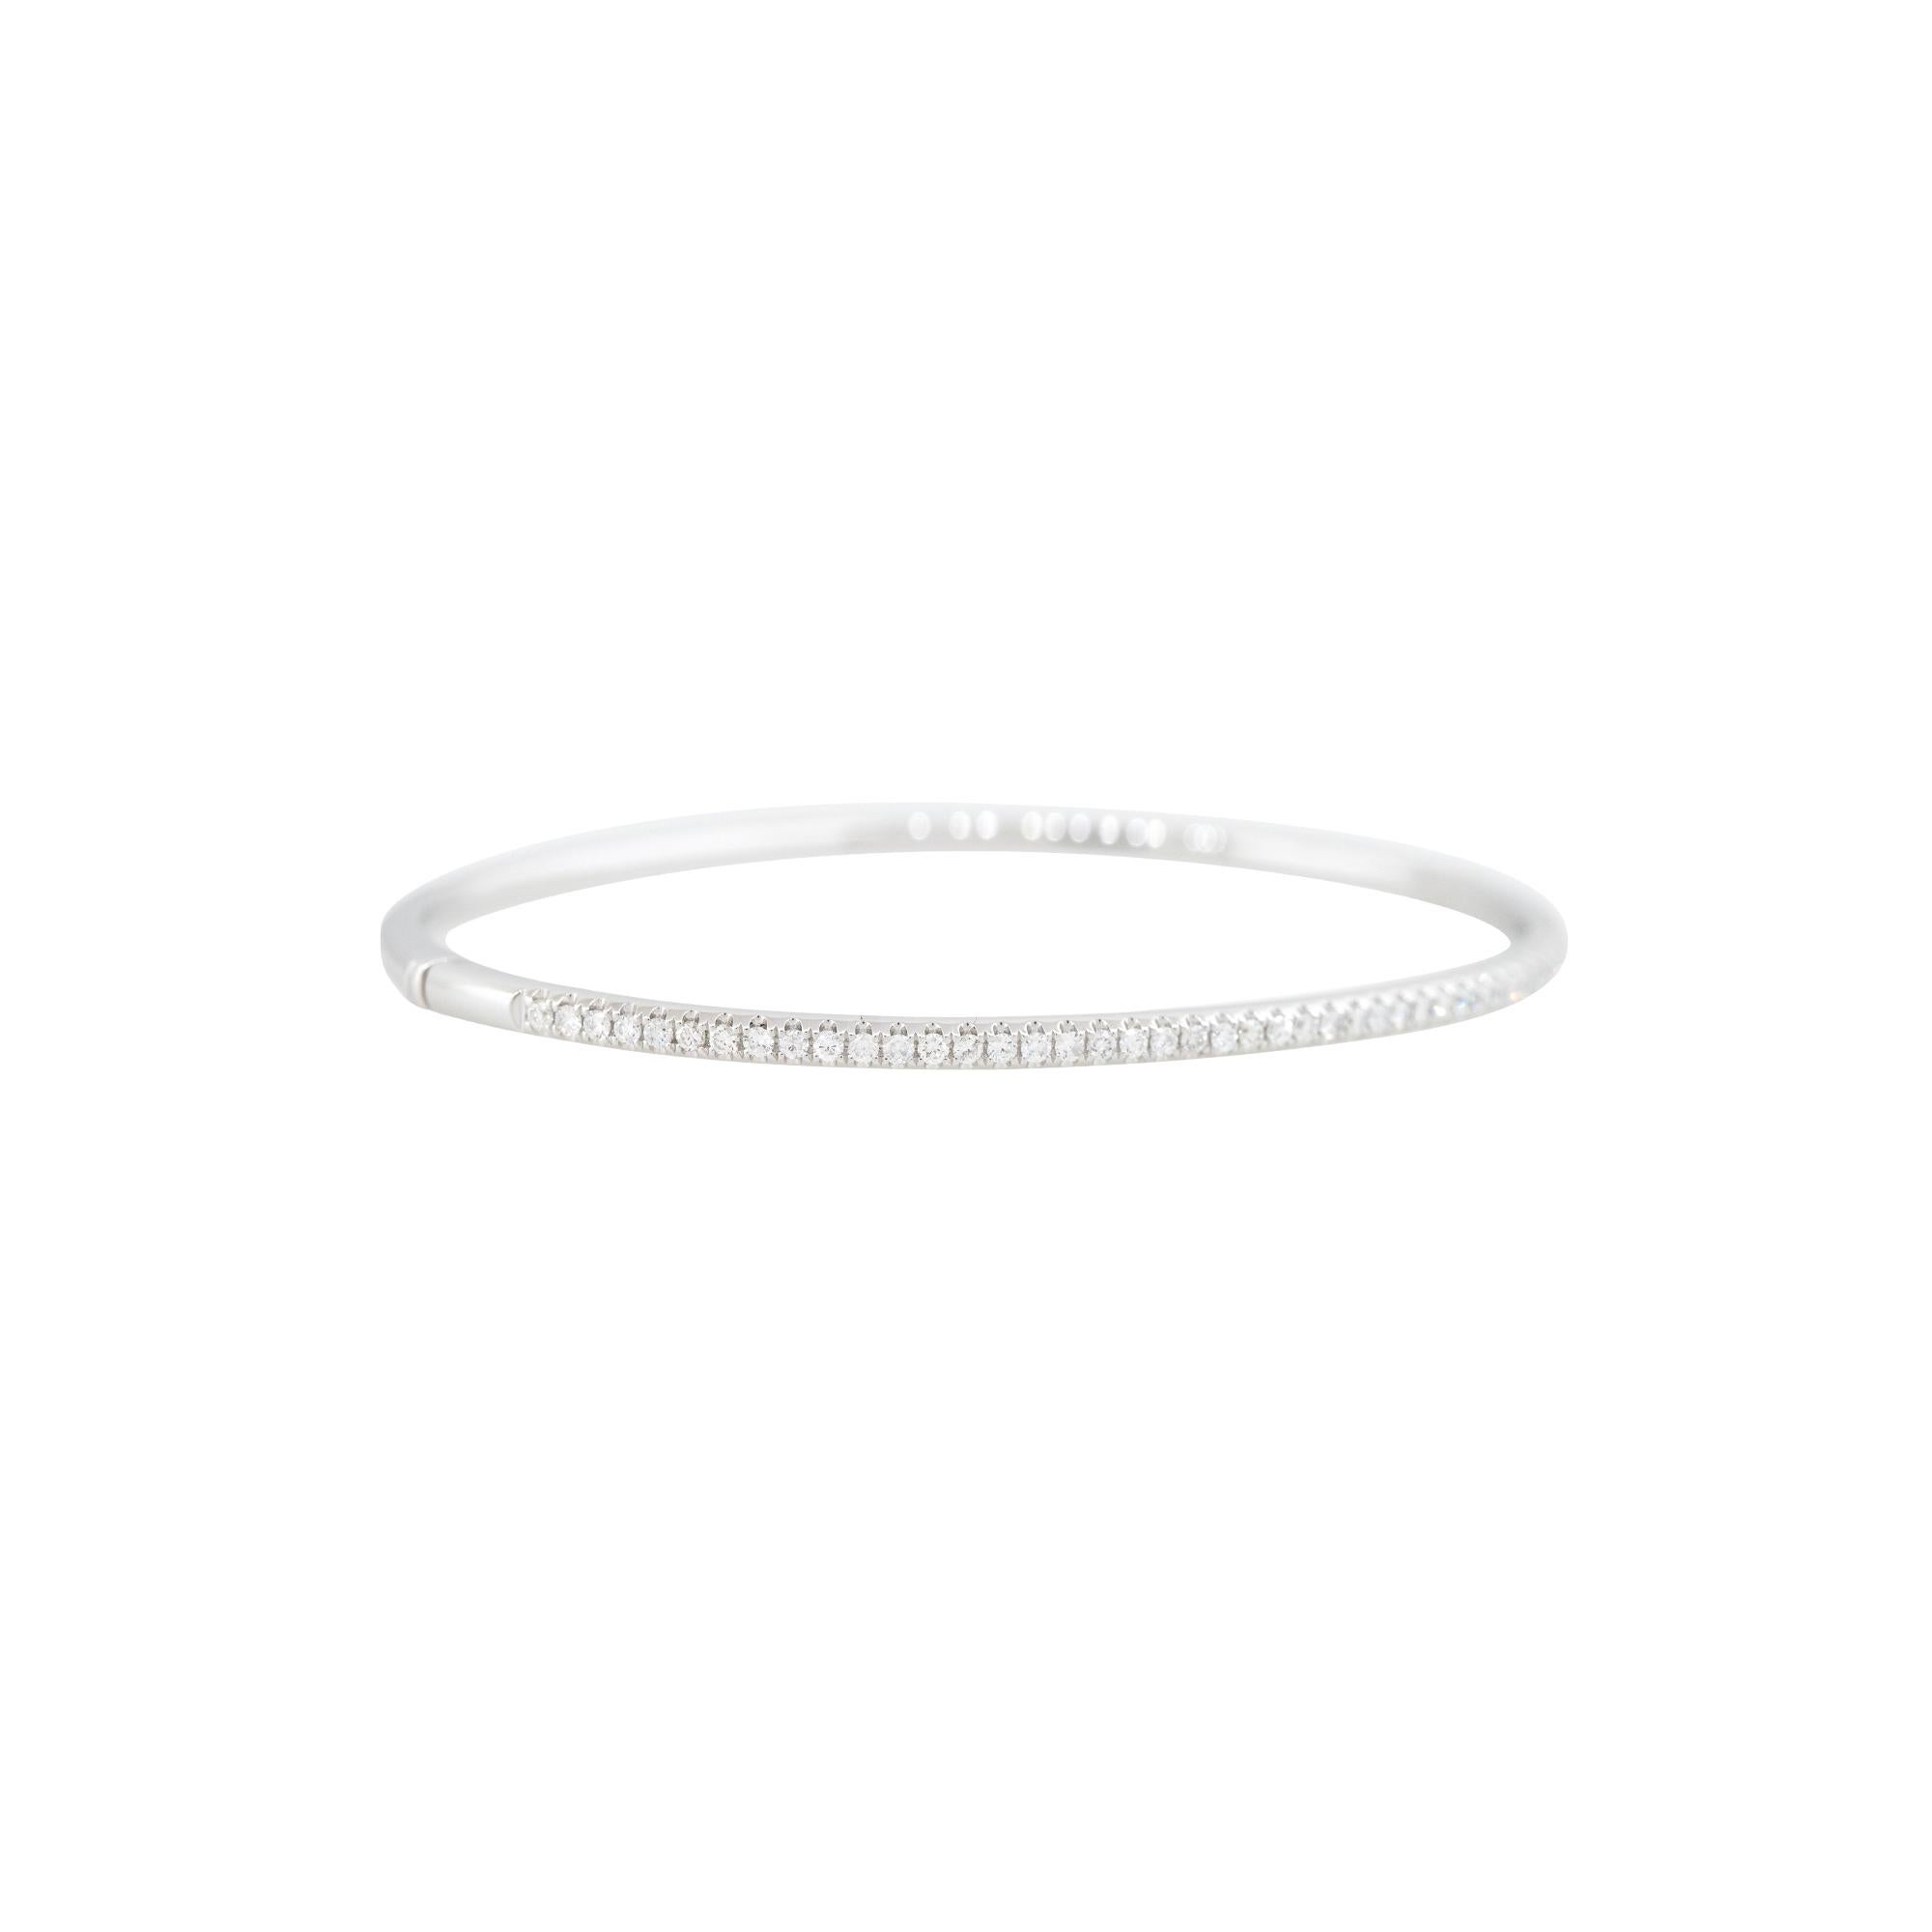 18k White Gold 0.50ctw Round Brilliant Cut Diamond Bangle Bracelet

Material: 18k White Gold
Diamond Details: There are approximately 0.50 carats of round brilliant-cut diamonds
Diamond Clarity: All diamonds are approximately VS/SI (very slightly to